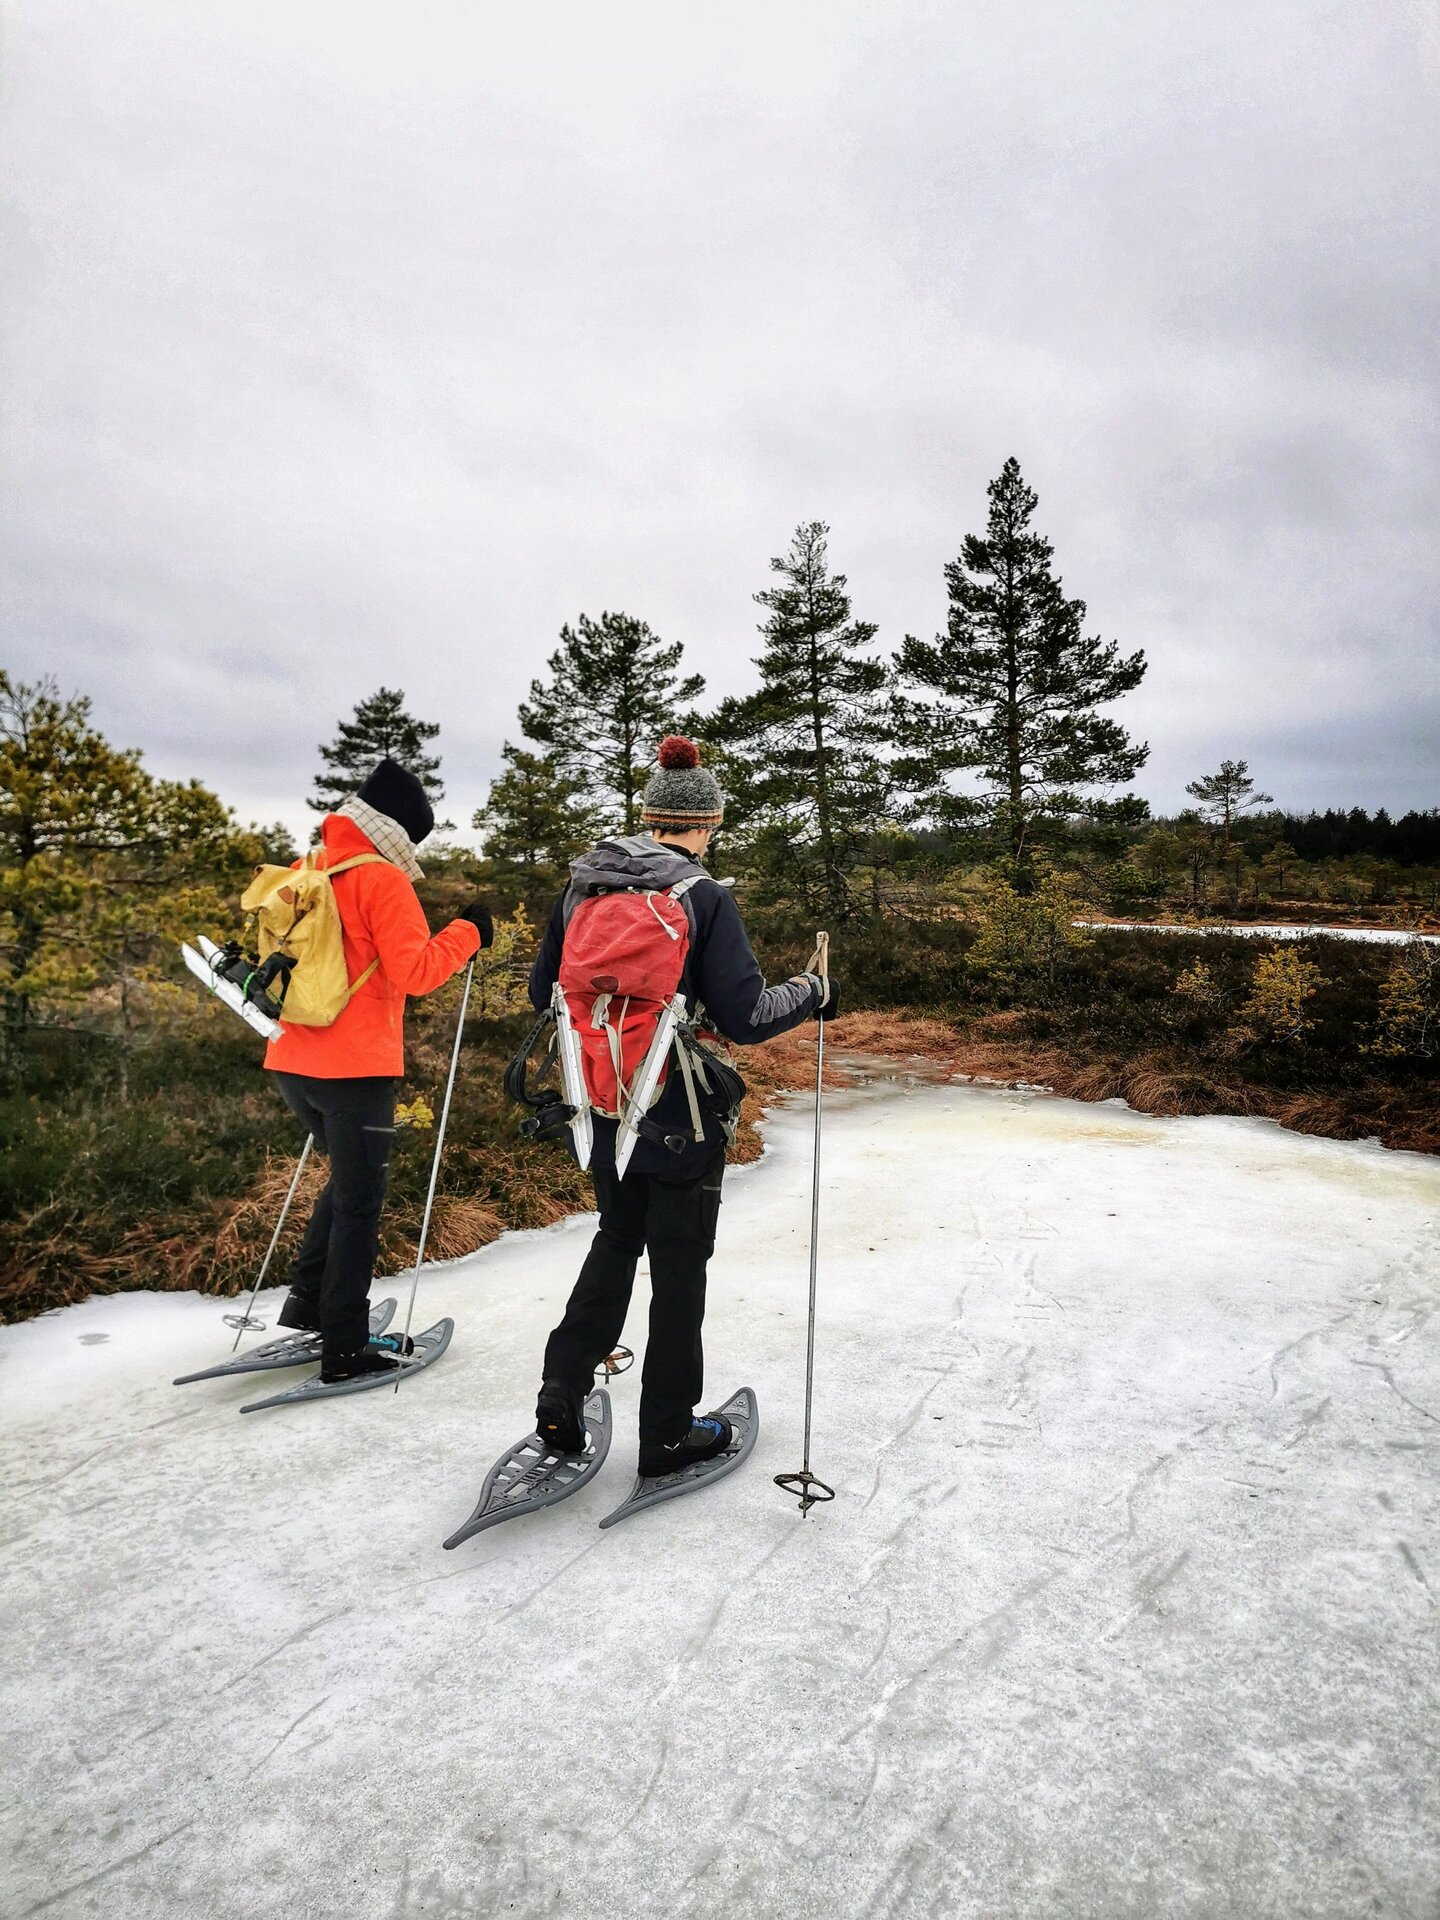 Forget about boring and overcrowded ice rinks – come and try our tour skates instead and glide on expansive ice trails in nature! Soomaa National Park